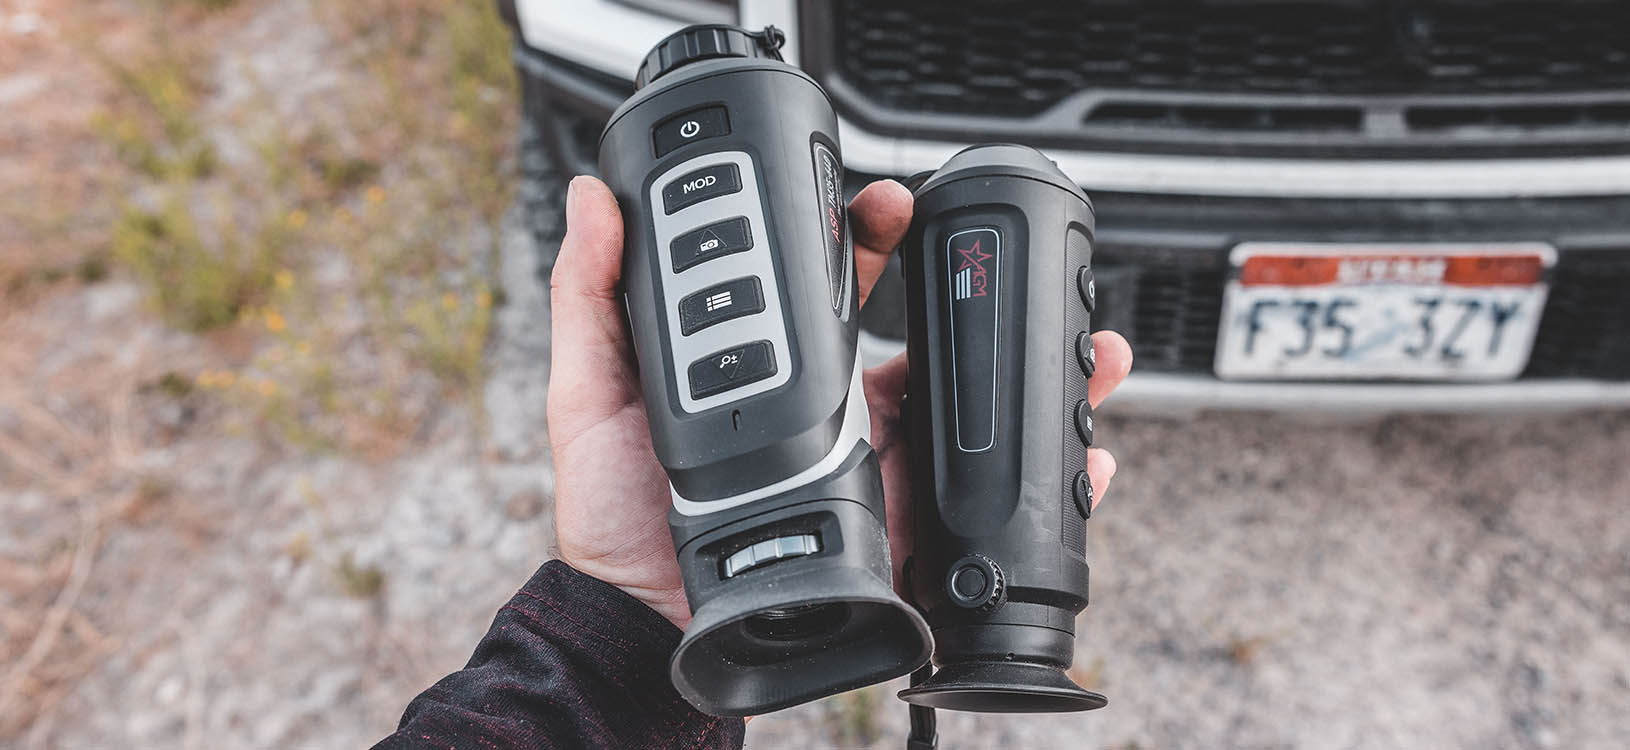 The best thermal monoculars